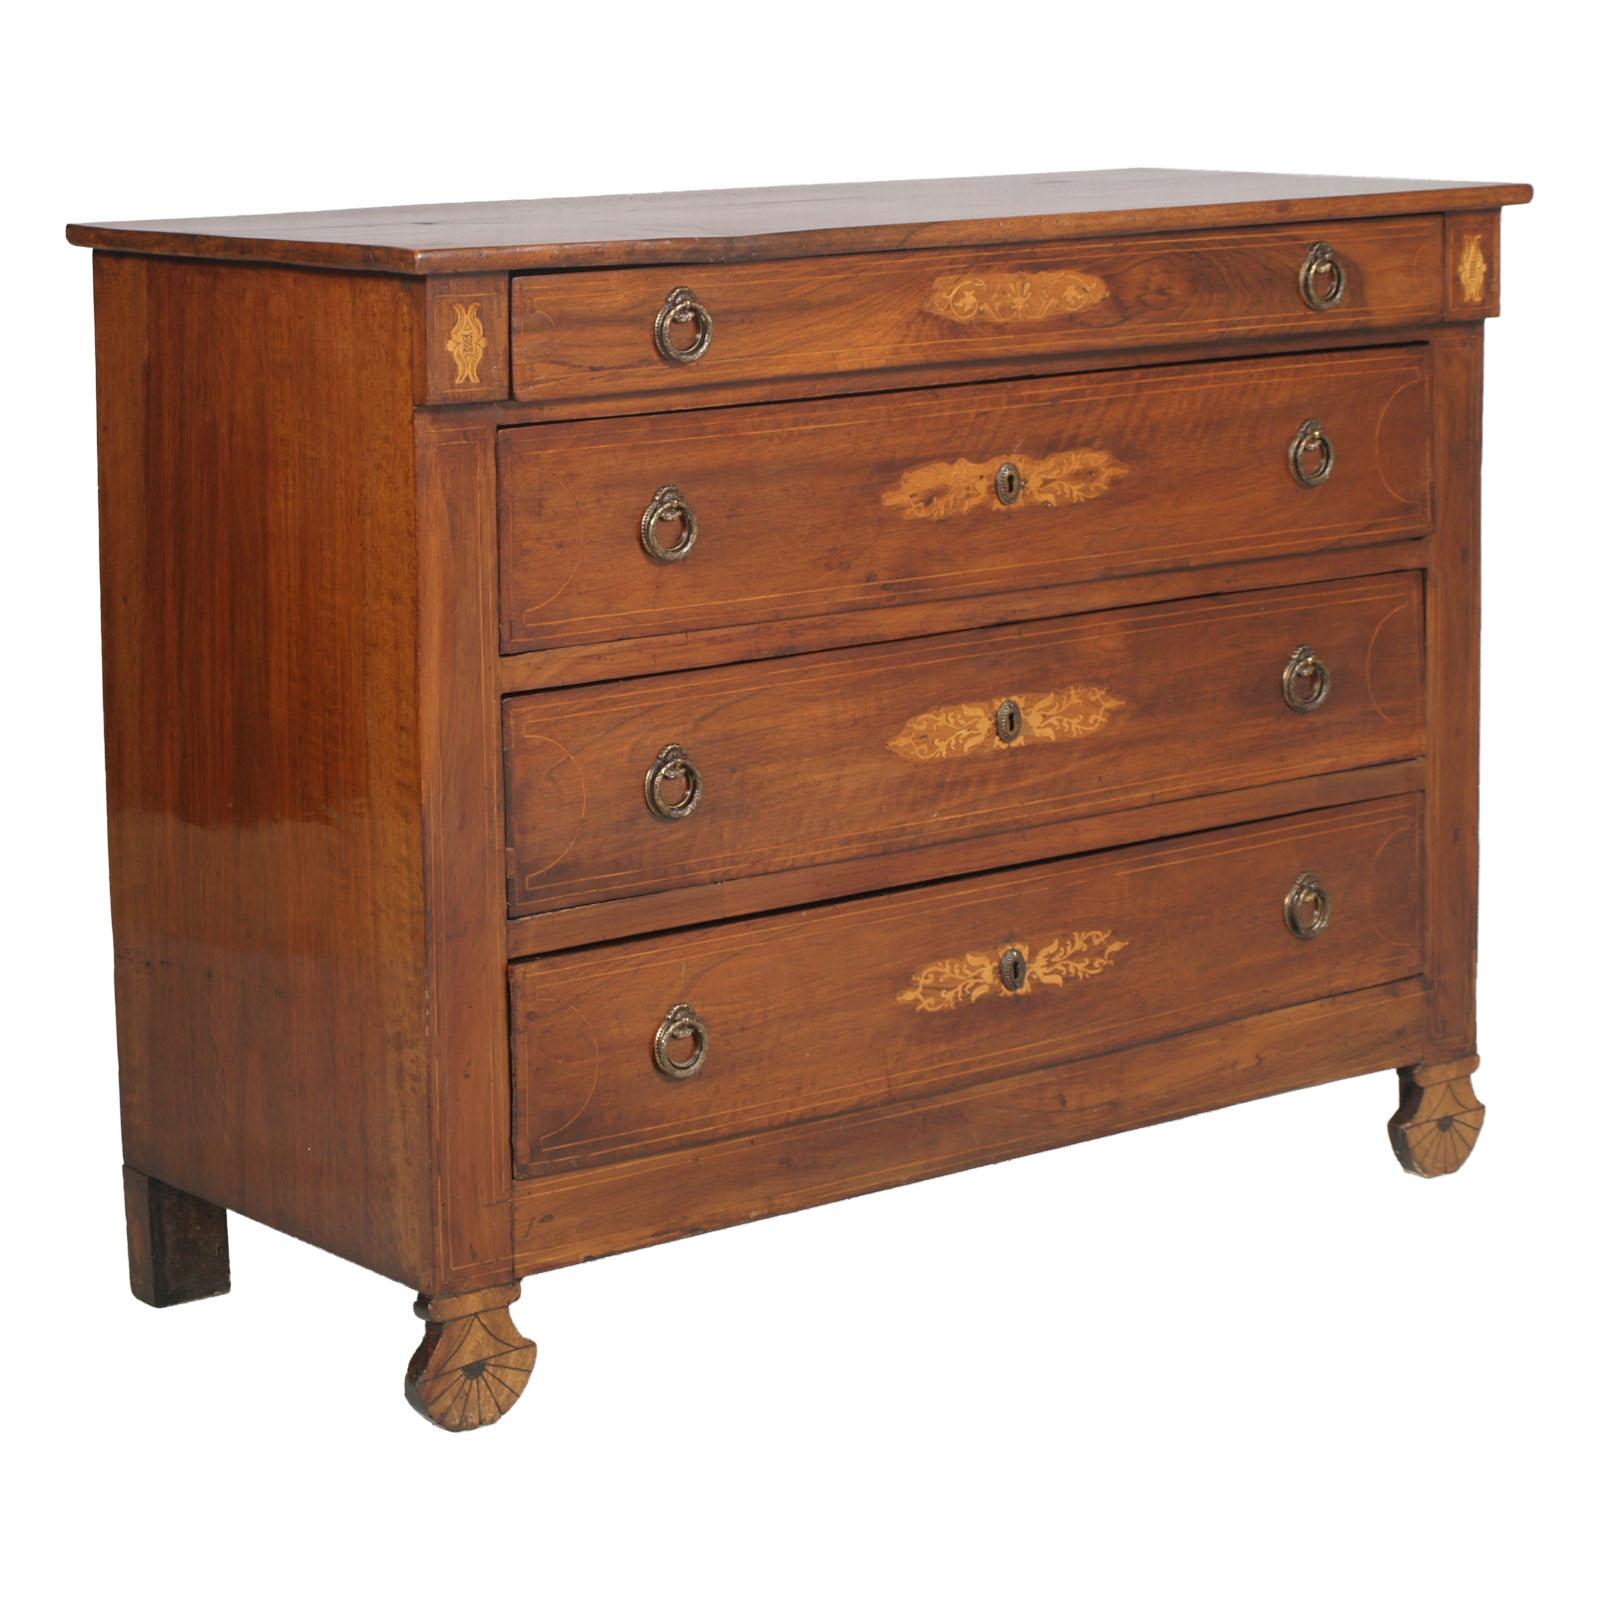 Italian antique precious mid-1600, Lombard-Piedmont chest of drawers all in massive walnut, with maple inlays, wax-polished. Restored the working locks
Very important chest of drawers suitable for any type of environment

Measures cm: H 90, W